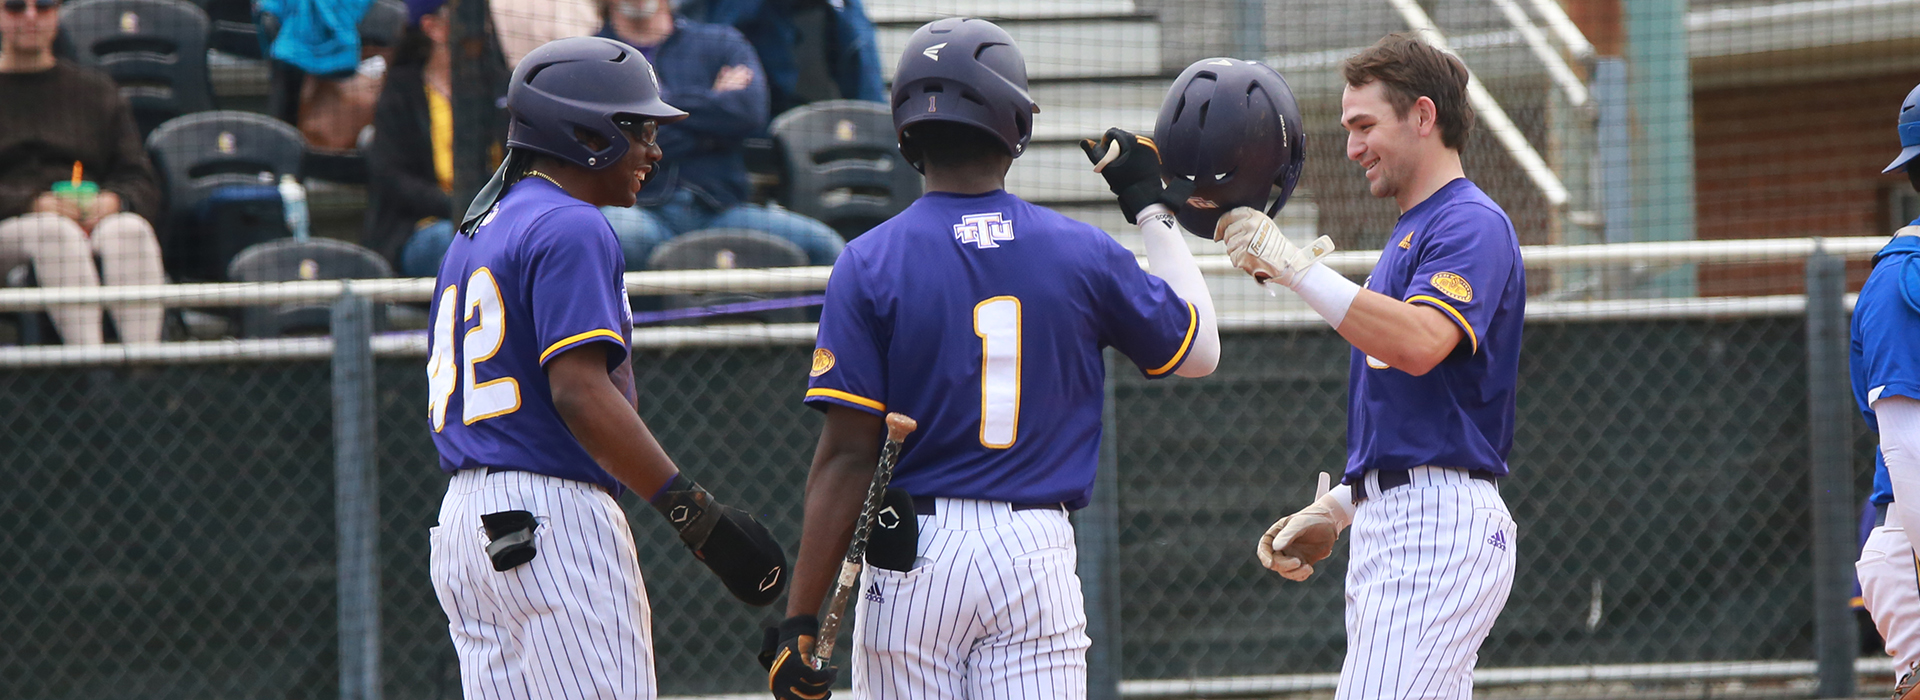 Wild walk-off caps doubleheader, series sweep for Golden Eagles